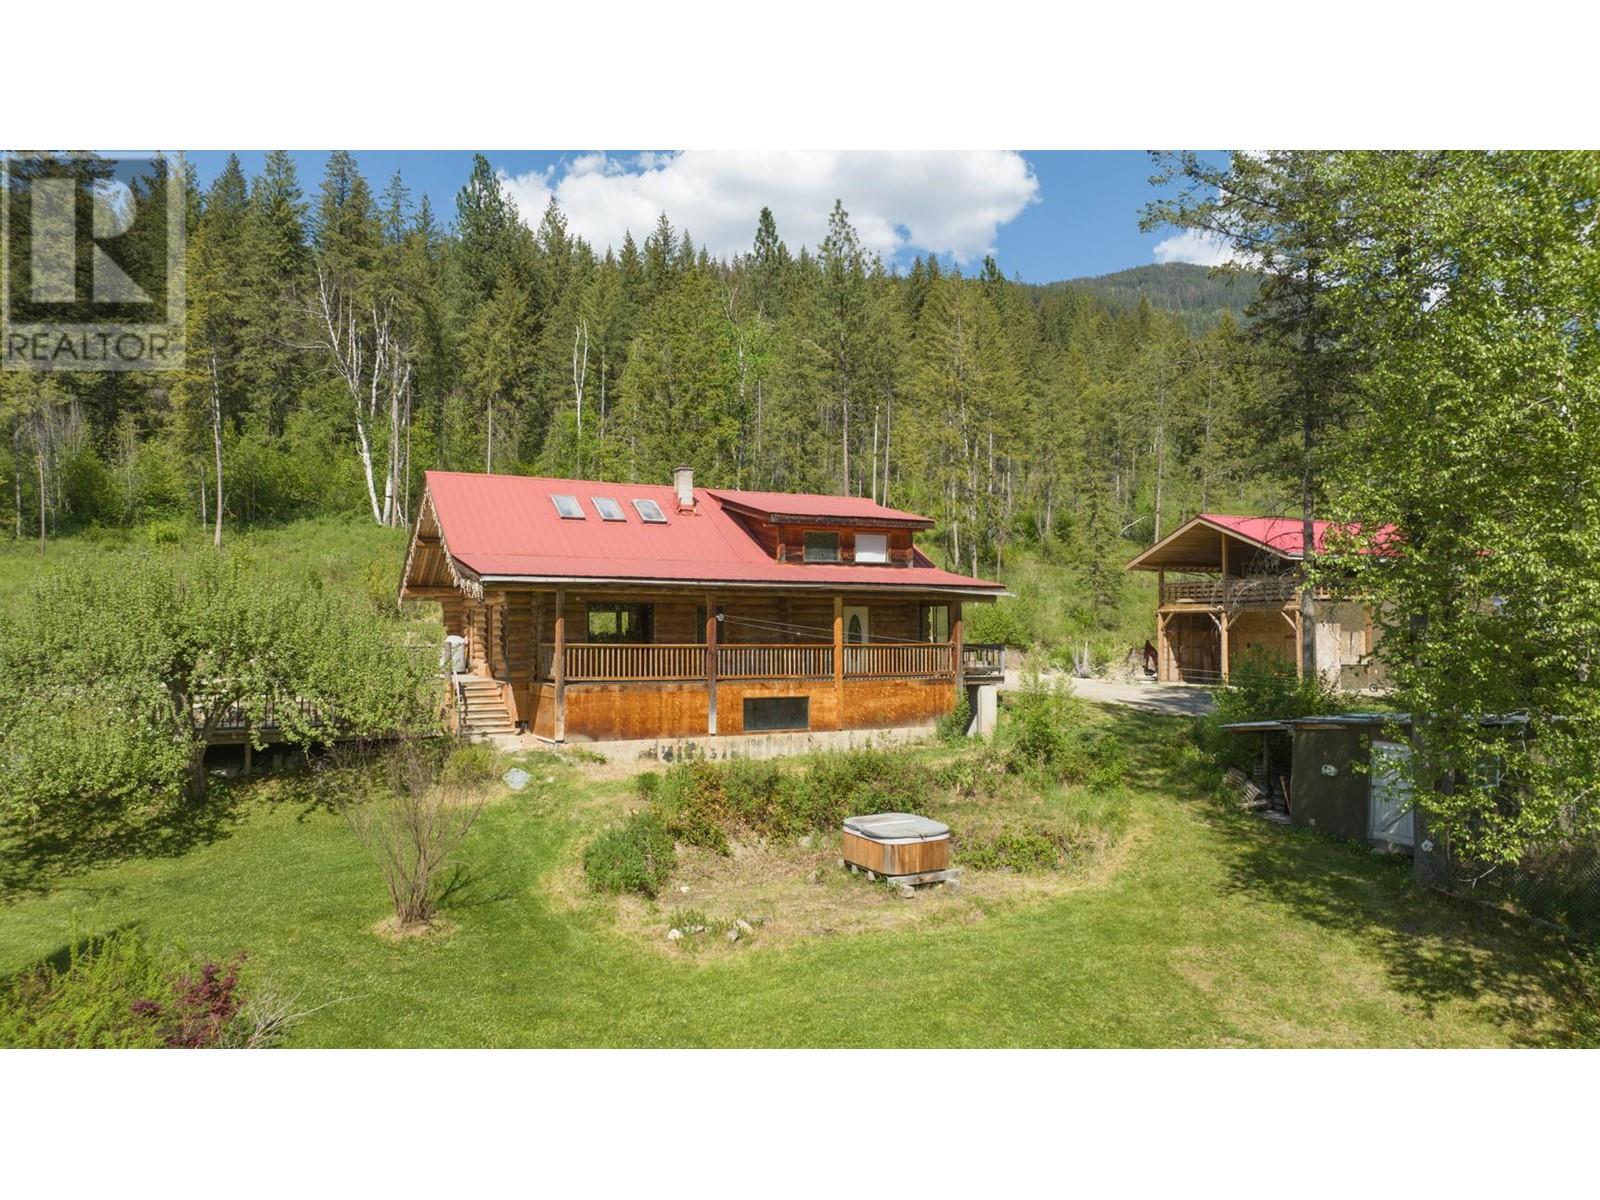 193 North Fork Road located in Cherryville, British Columbia